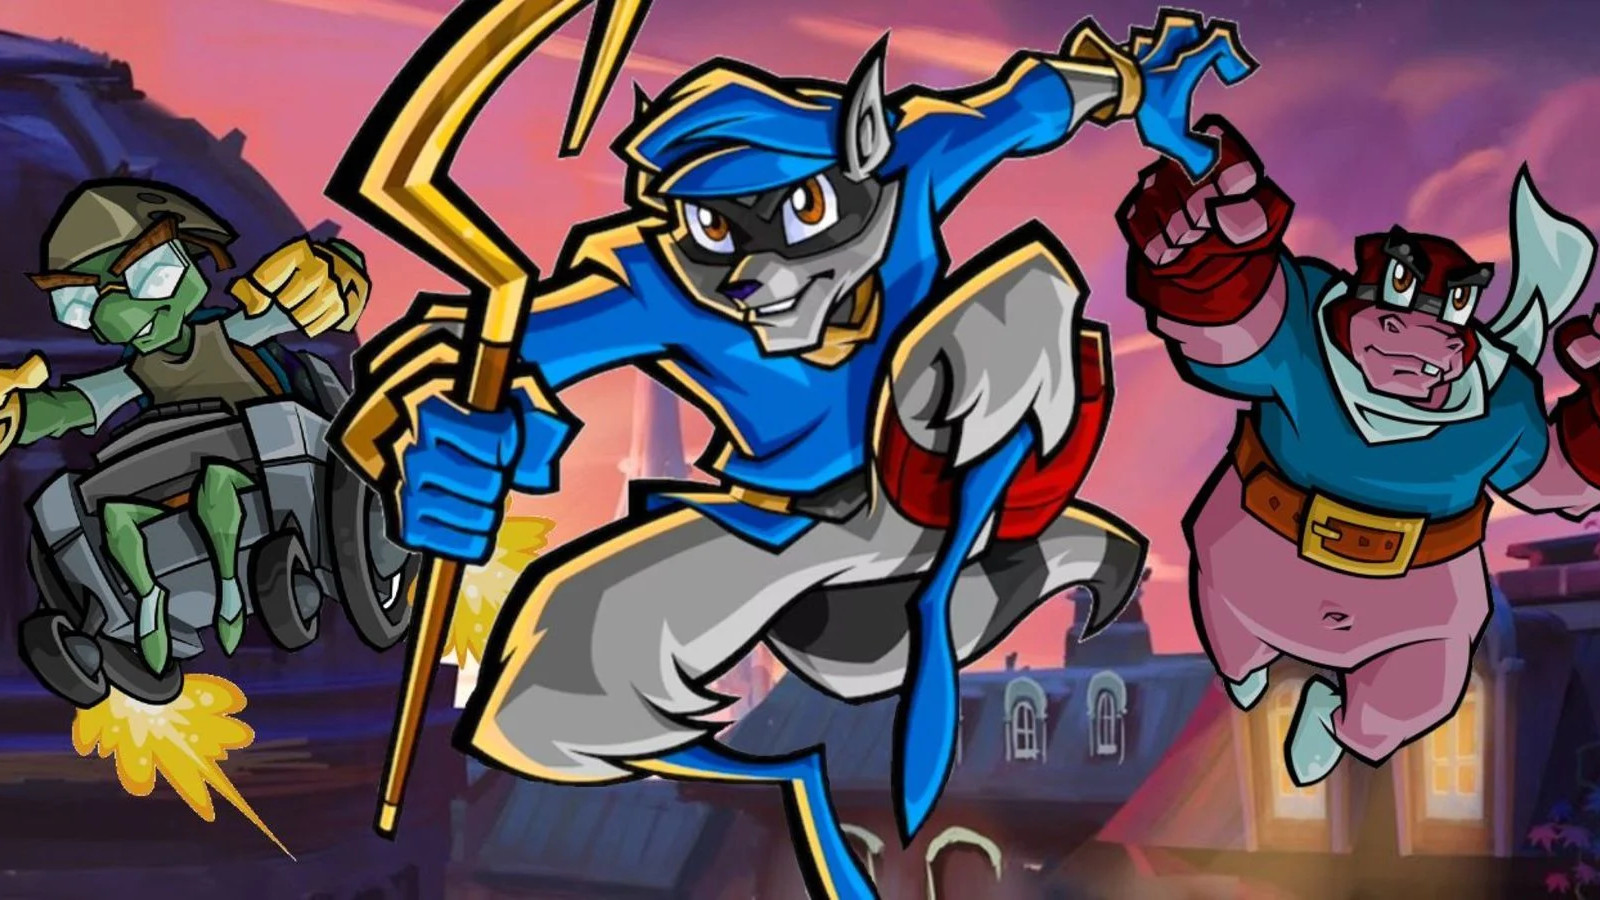 Sly Cooper And The Thievius Raccoonus HD Part 3, The Sly Collection